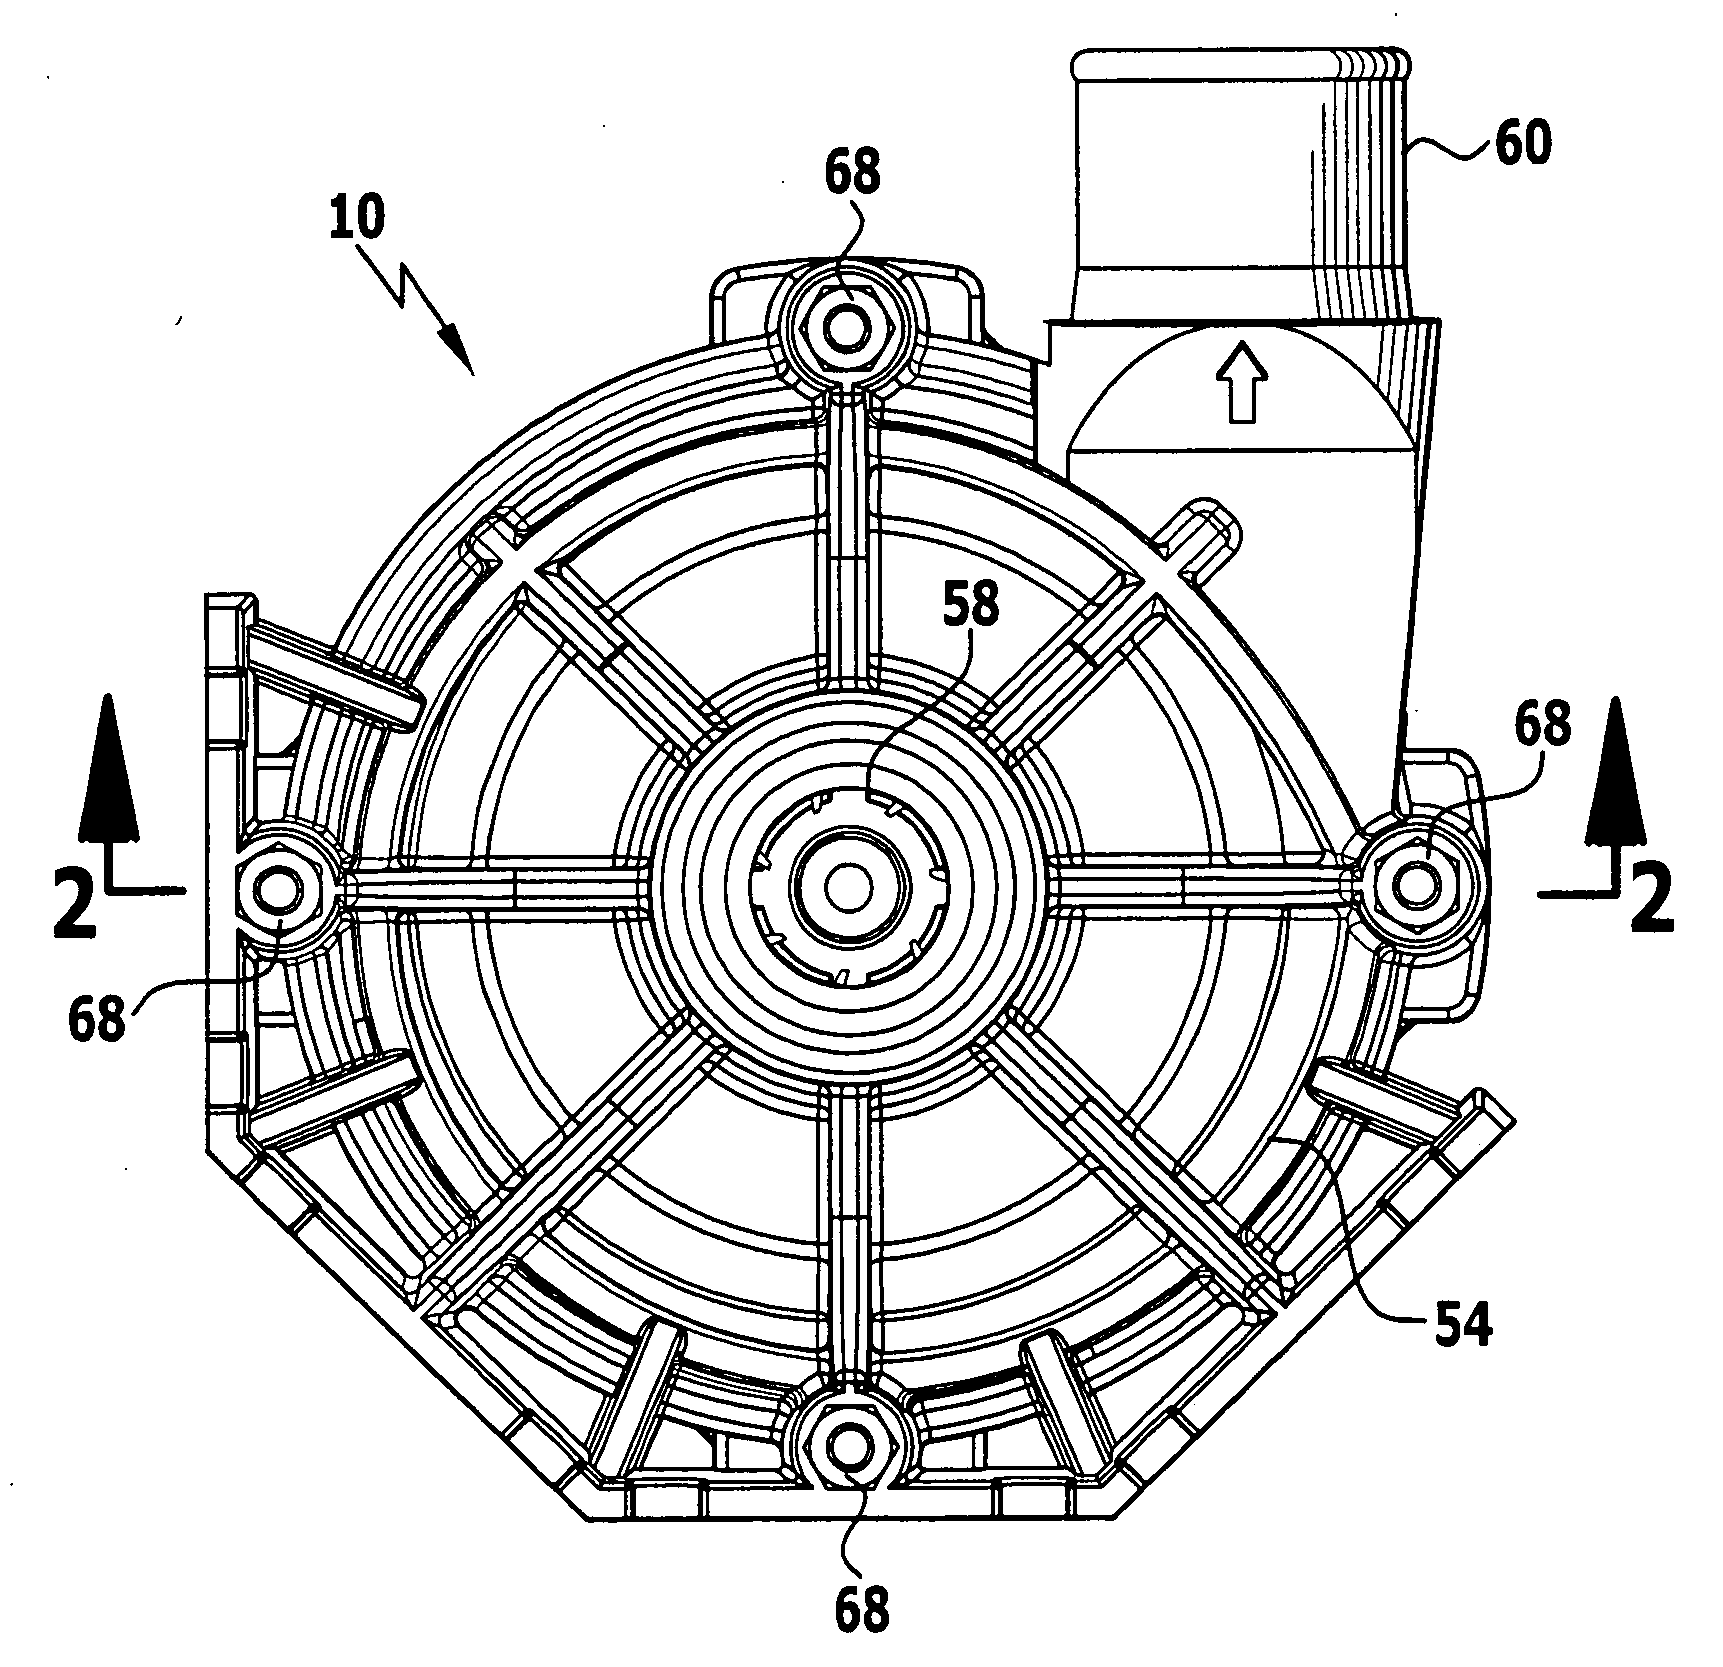 Circulation pump, heating system and method of determining the flow rate of a liquid through a pipe